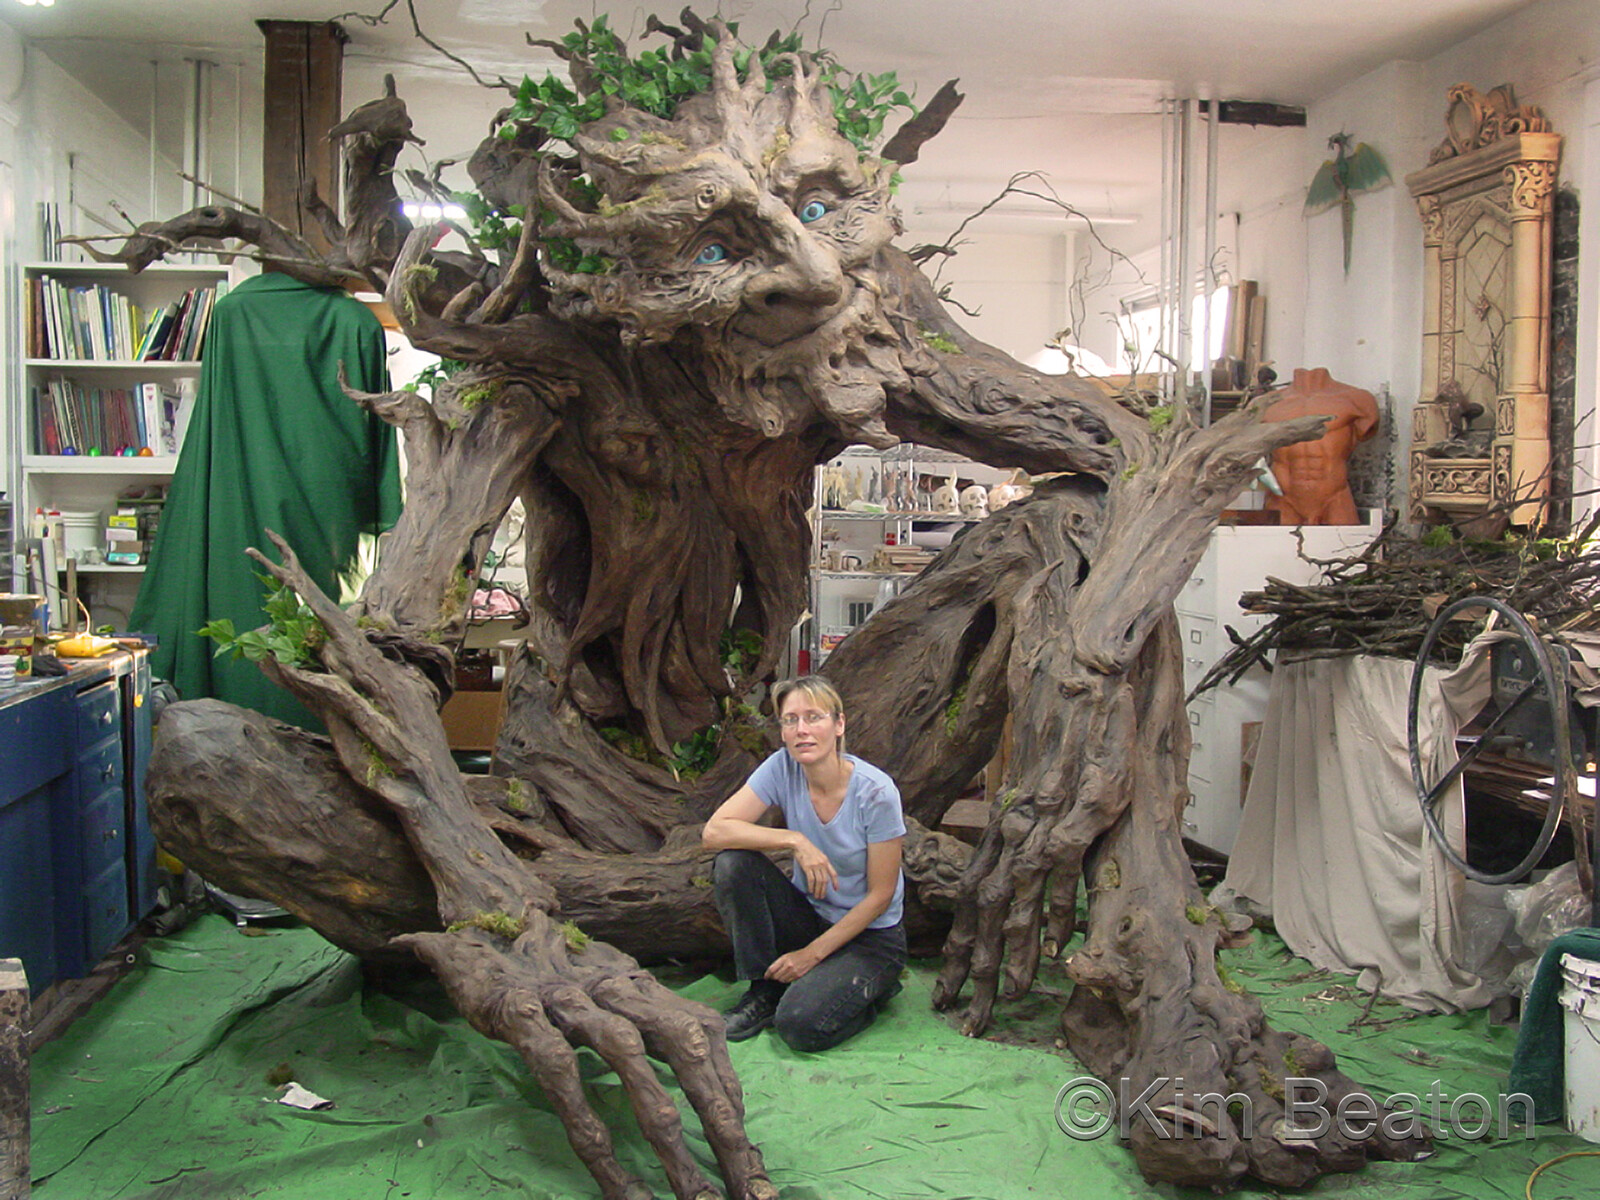 The Tree Troll nearing completion in my old workshop.